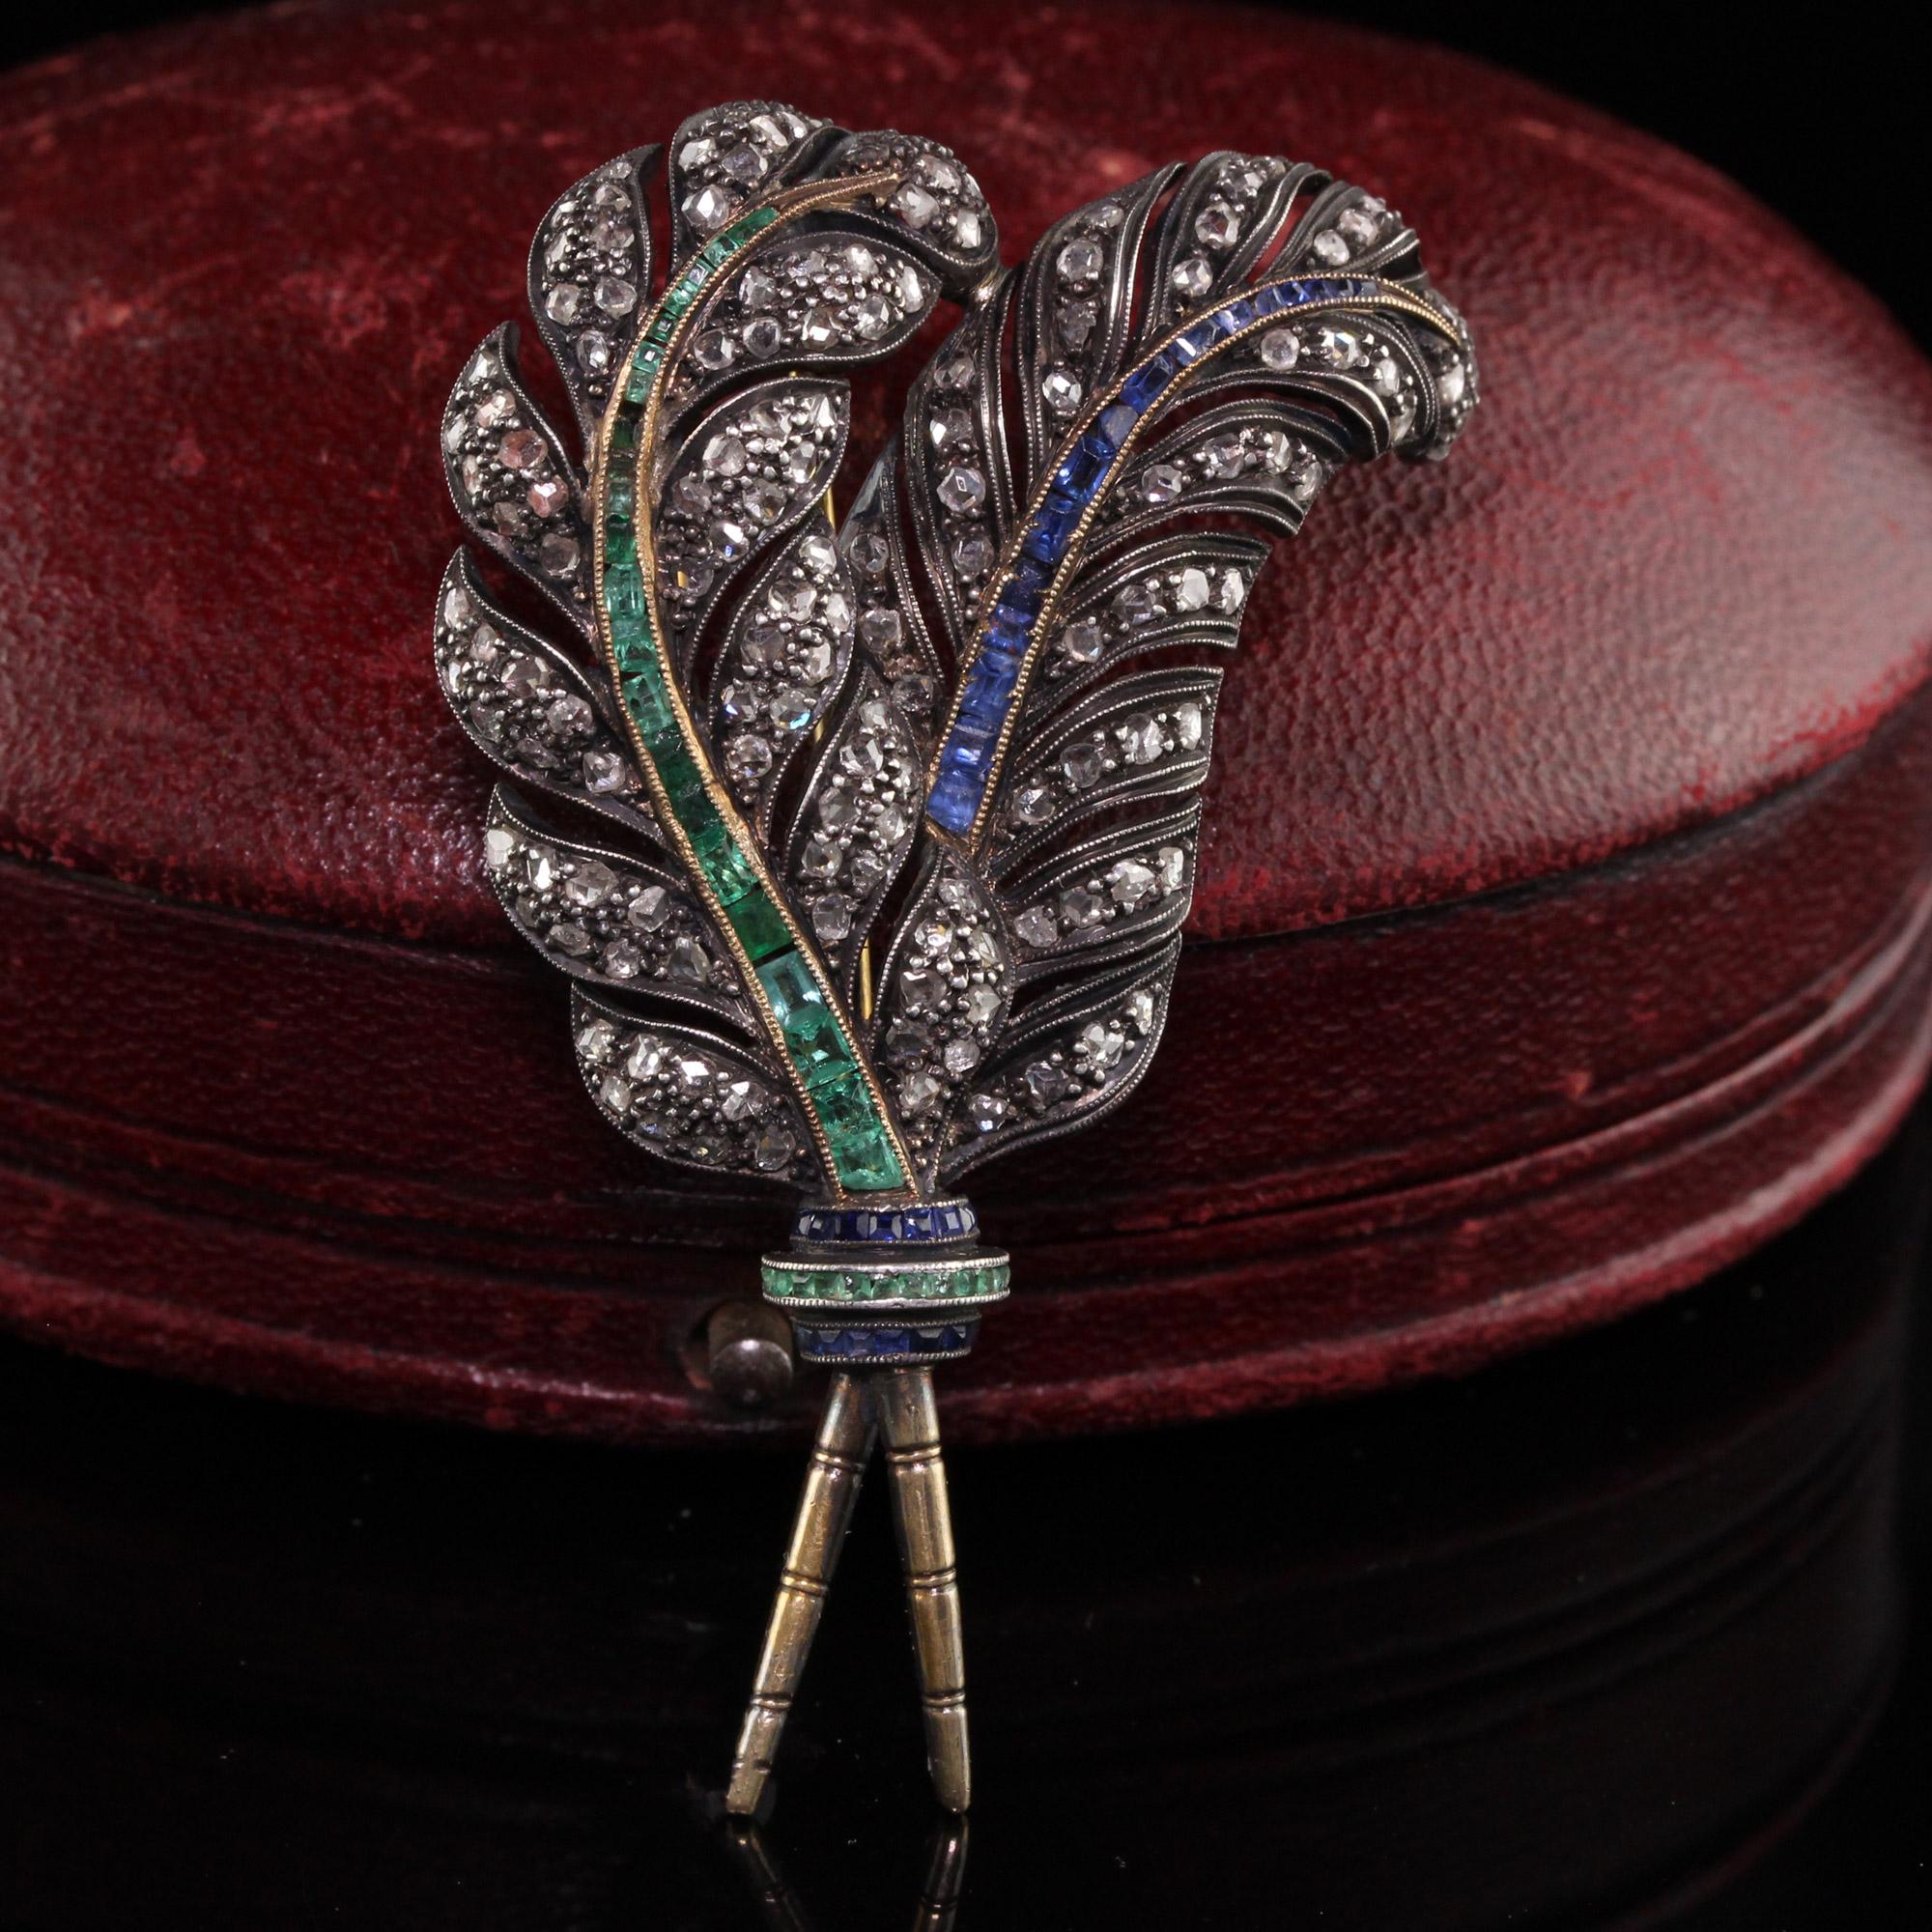 Beautiful Antique Vintage 18K Yellow Gold and Silver Rose Cut Diamond Wheat Pin. This incredible pin is crafted in 18k yellow gold and silver. The top of the pin has rose cut diamonds, natural emeralds, and natural sapphires on it. The pin is in